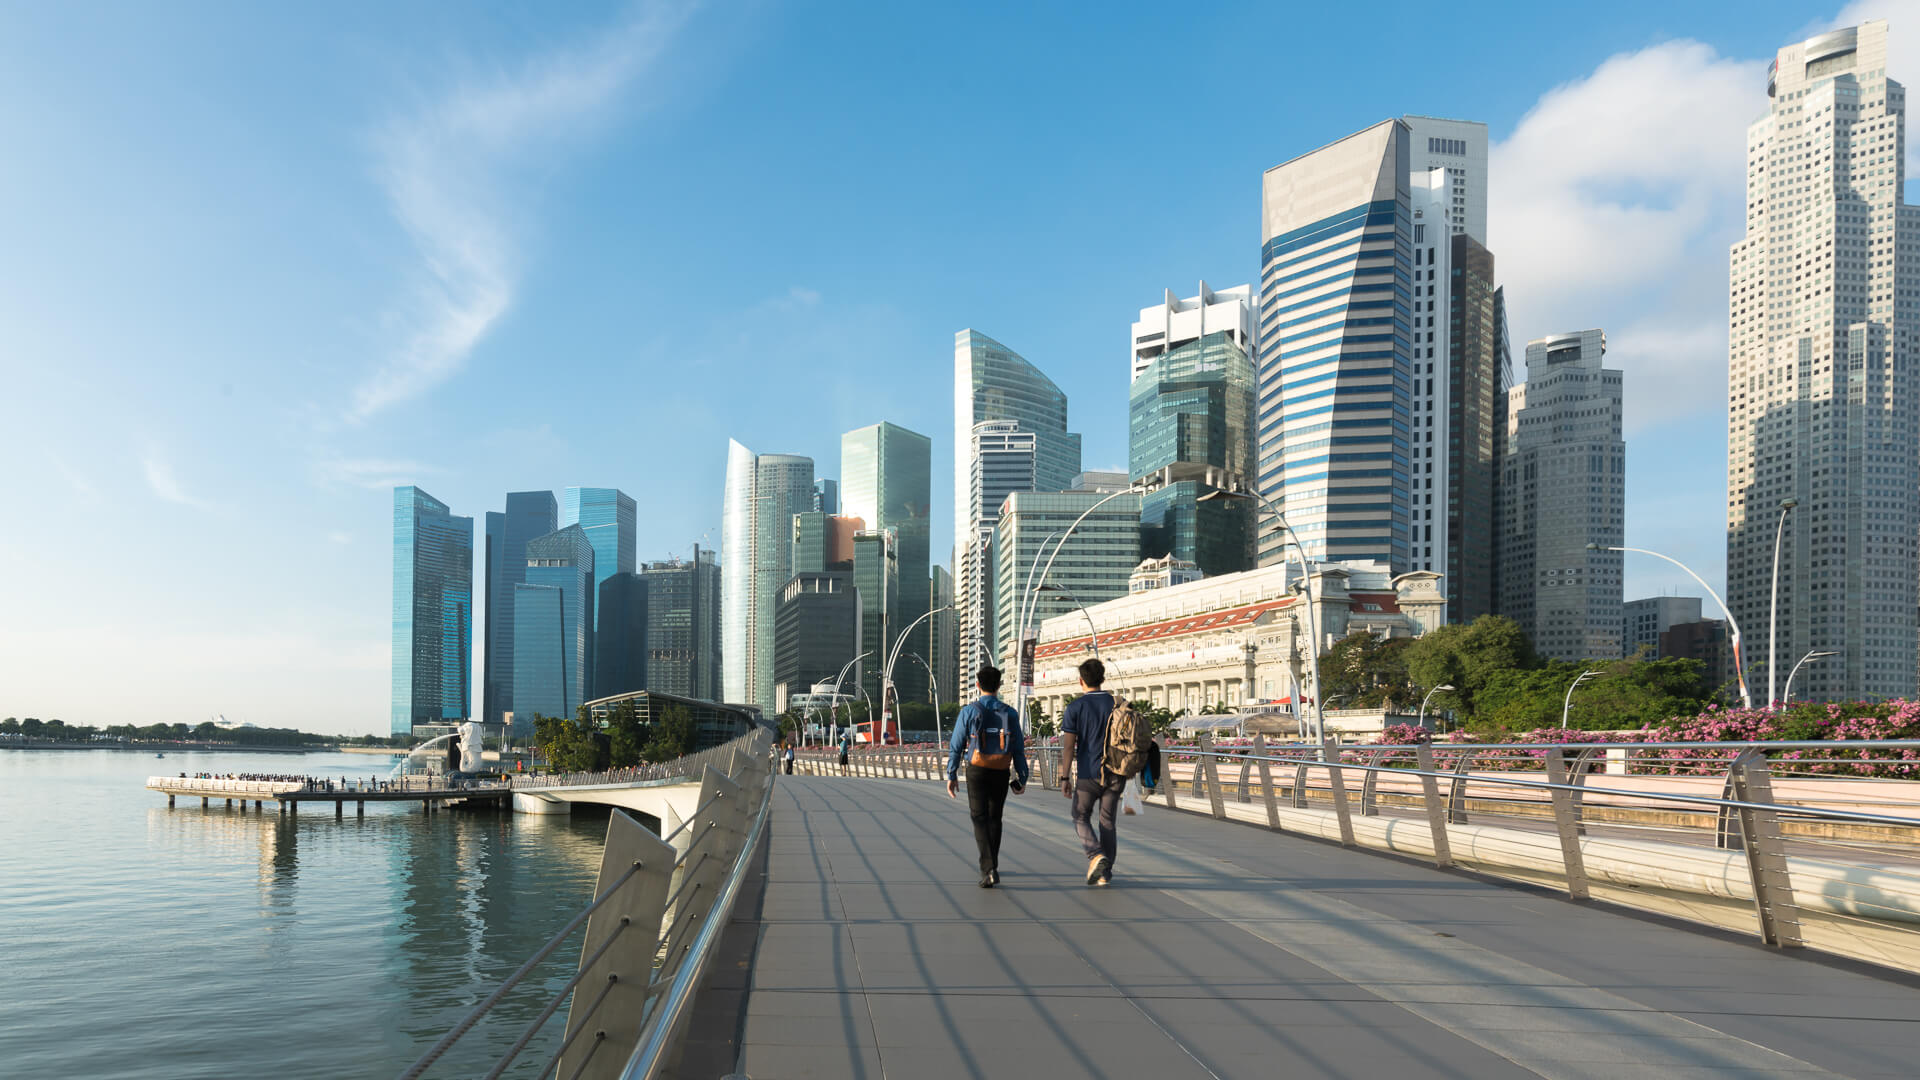 <ul> <li><strong>Cost-of-living index:</strong> 83.98</li> <li><strong>Local purchasing power:</strong> 91.34</li> </ul> <p>Rent in Singapore is $1,908.42 per month, but its cost-of-living is only slightly more than 6% higher than the U.S. average.</p> <p><strong><em>Take Our Poll: <a href="https://www.gobankingrates.com/retirement/planning/poll-do-you-think-you-will-be-able-to-retire-at-age-65/?utm_campaign=1179207&utm_source=msn.com&utm_content=5&utm_medium=rss">Do You Think You Will Be Able To Retire at Age 65?</a></em></strong></p>